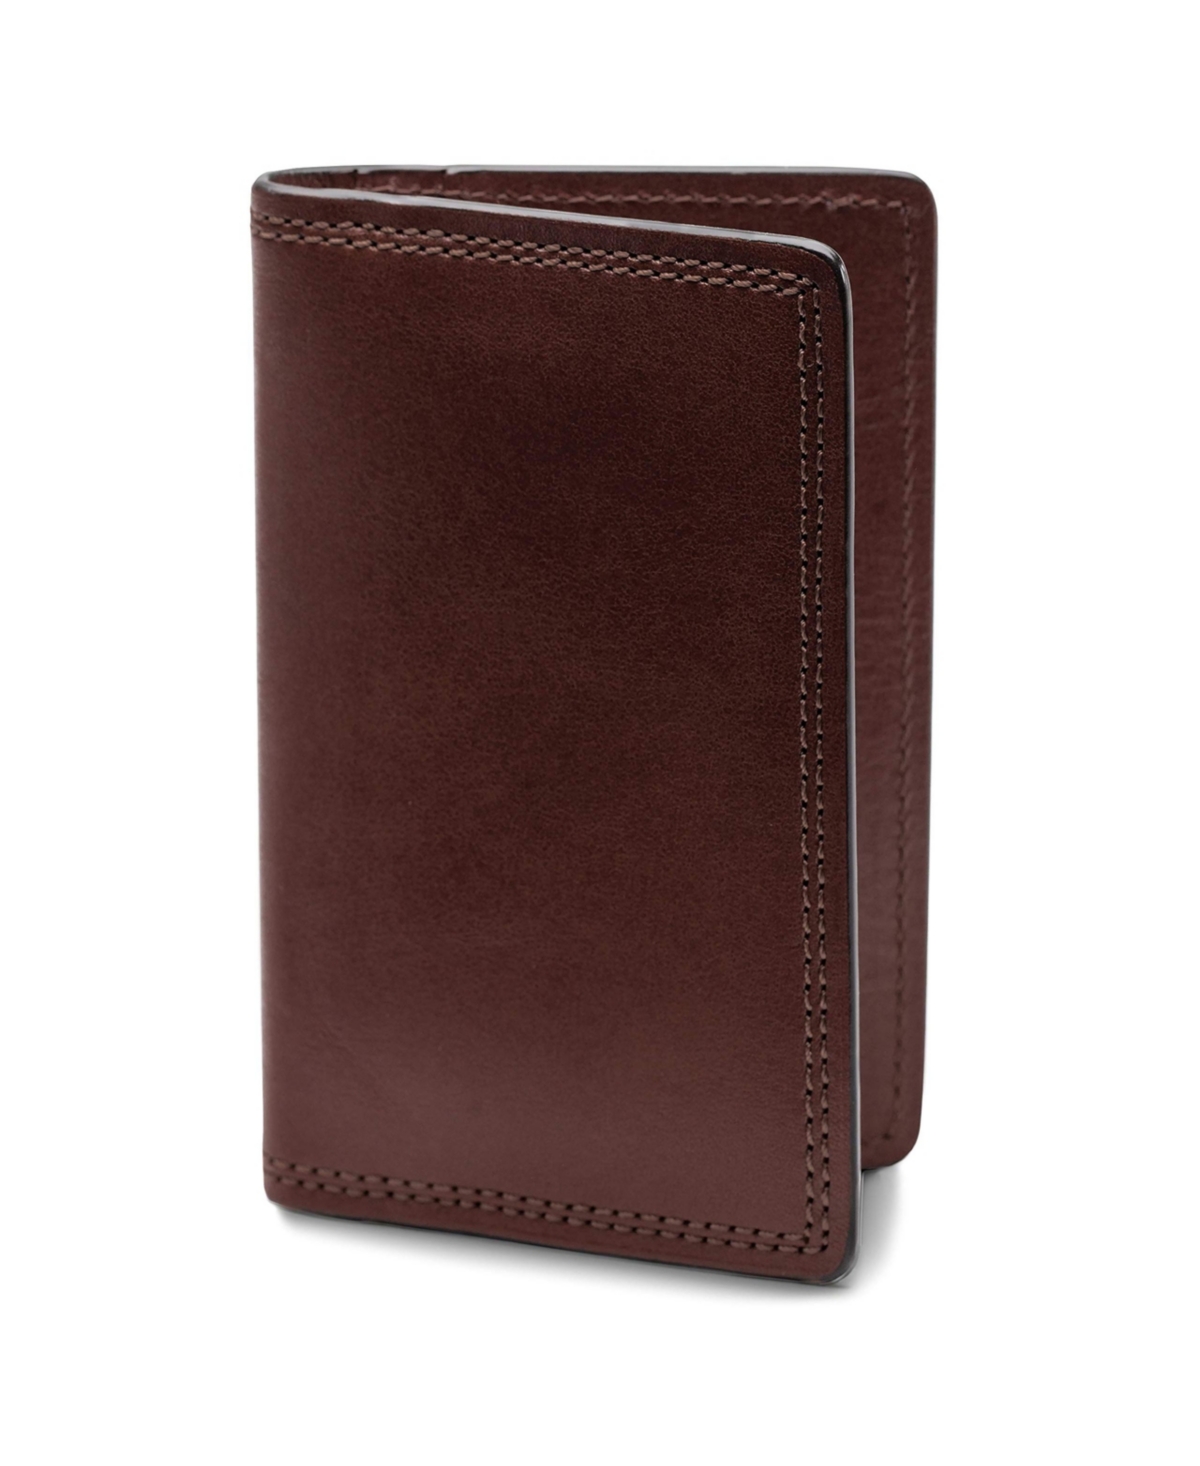 Men's Dolce Collection - Calling Card Case - Dark brown